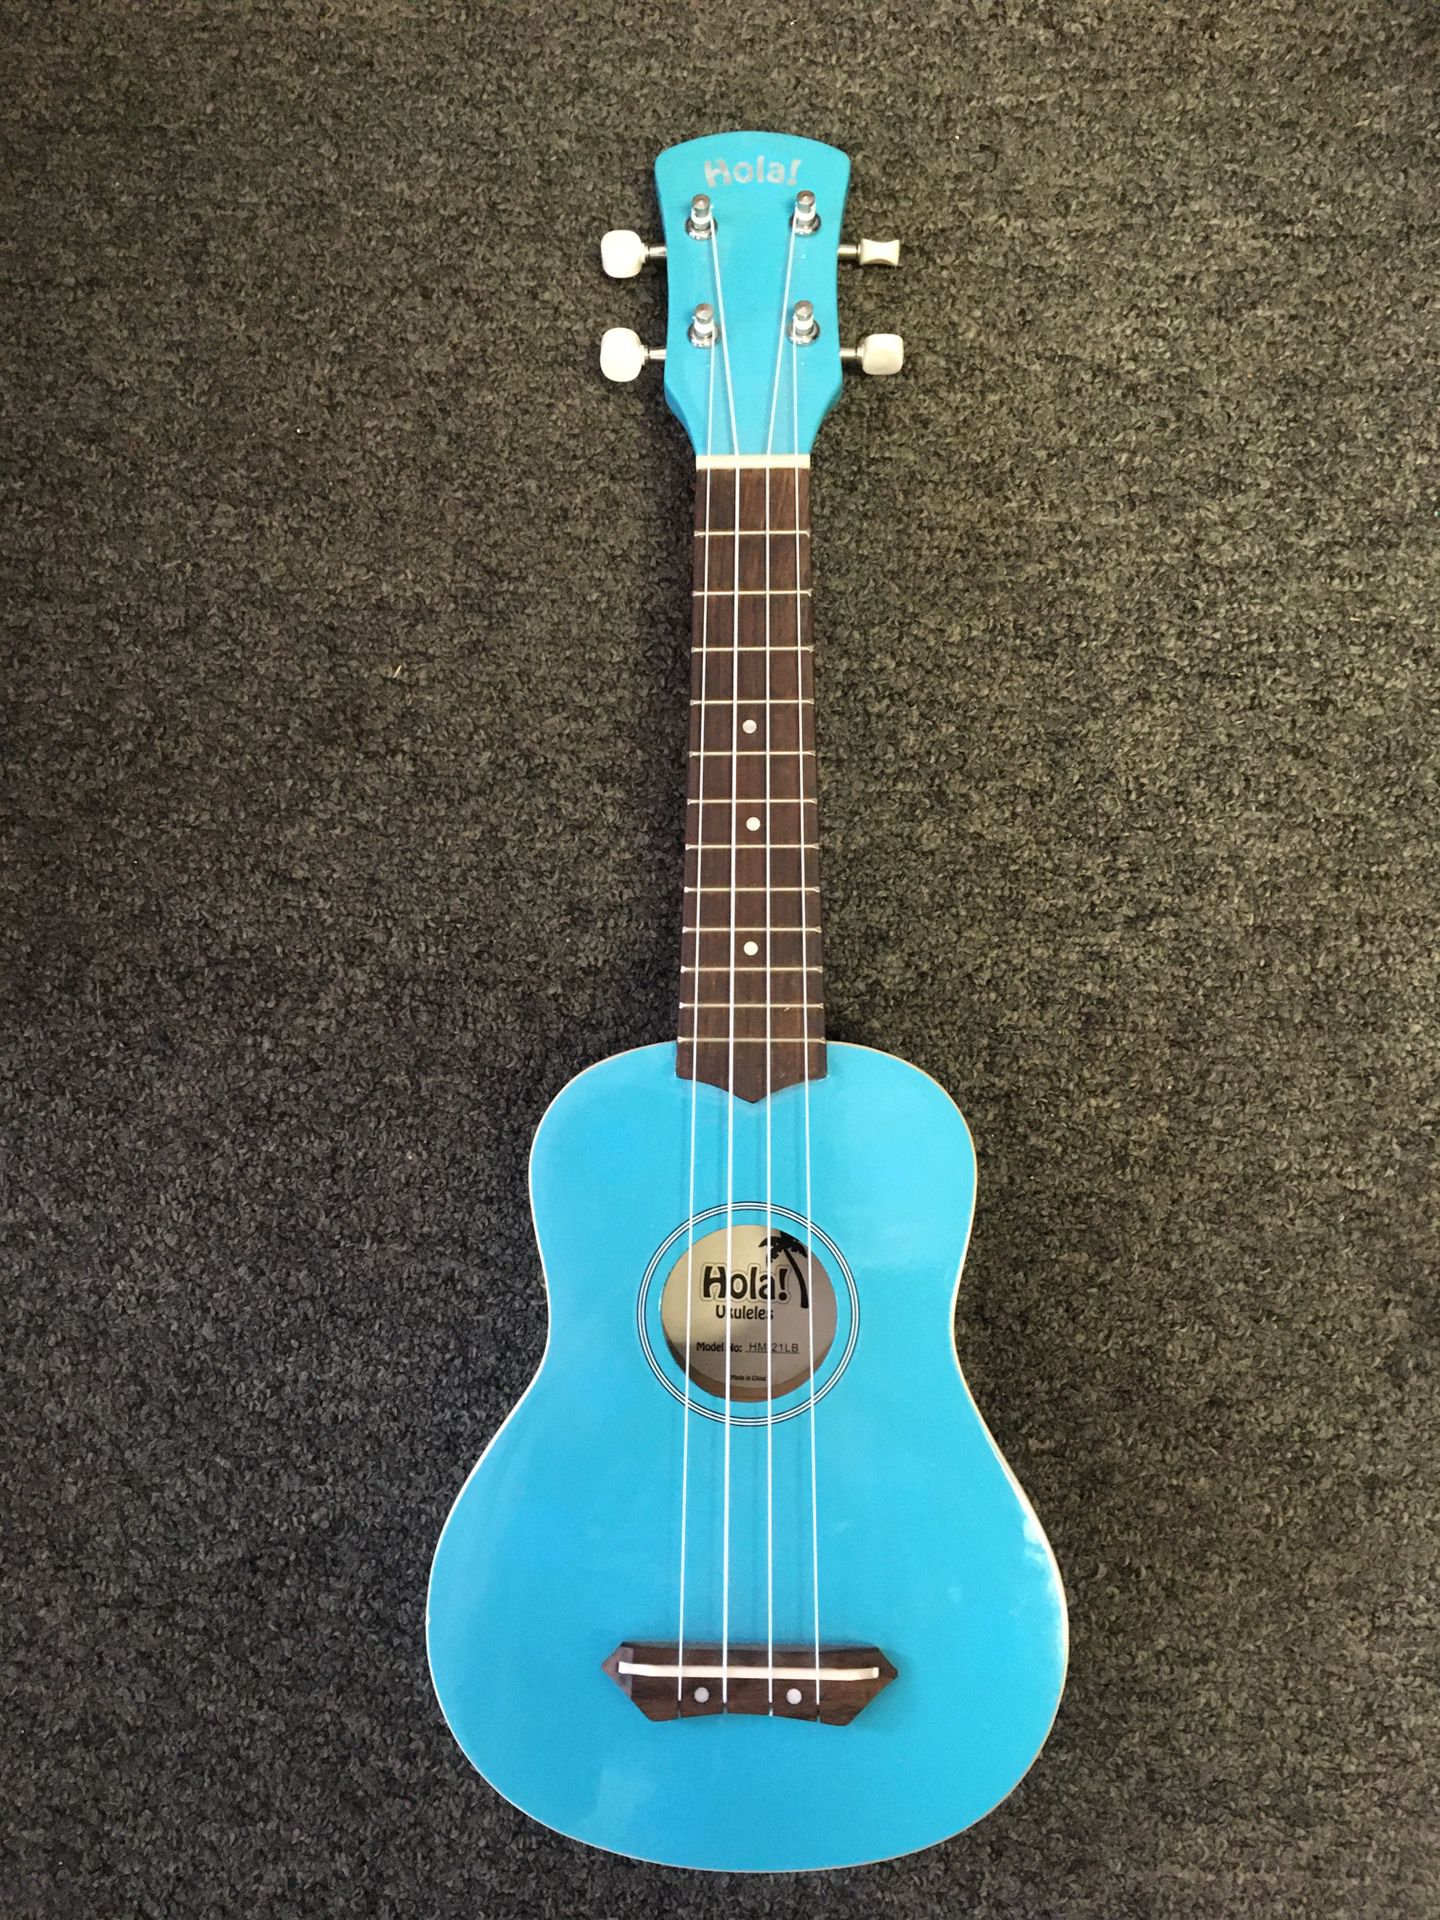 Hola baby blue ukulele - used only a few times - like new condition